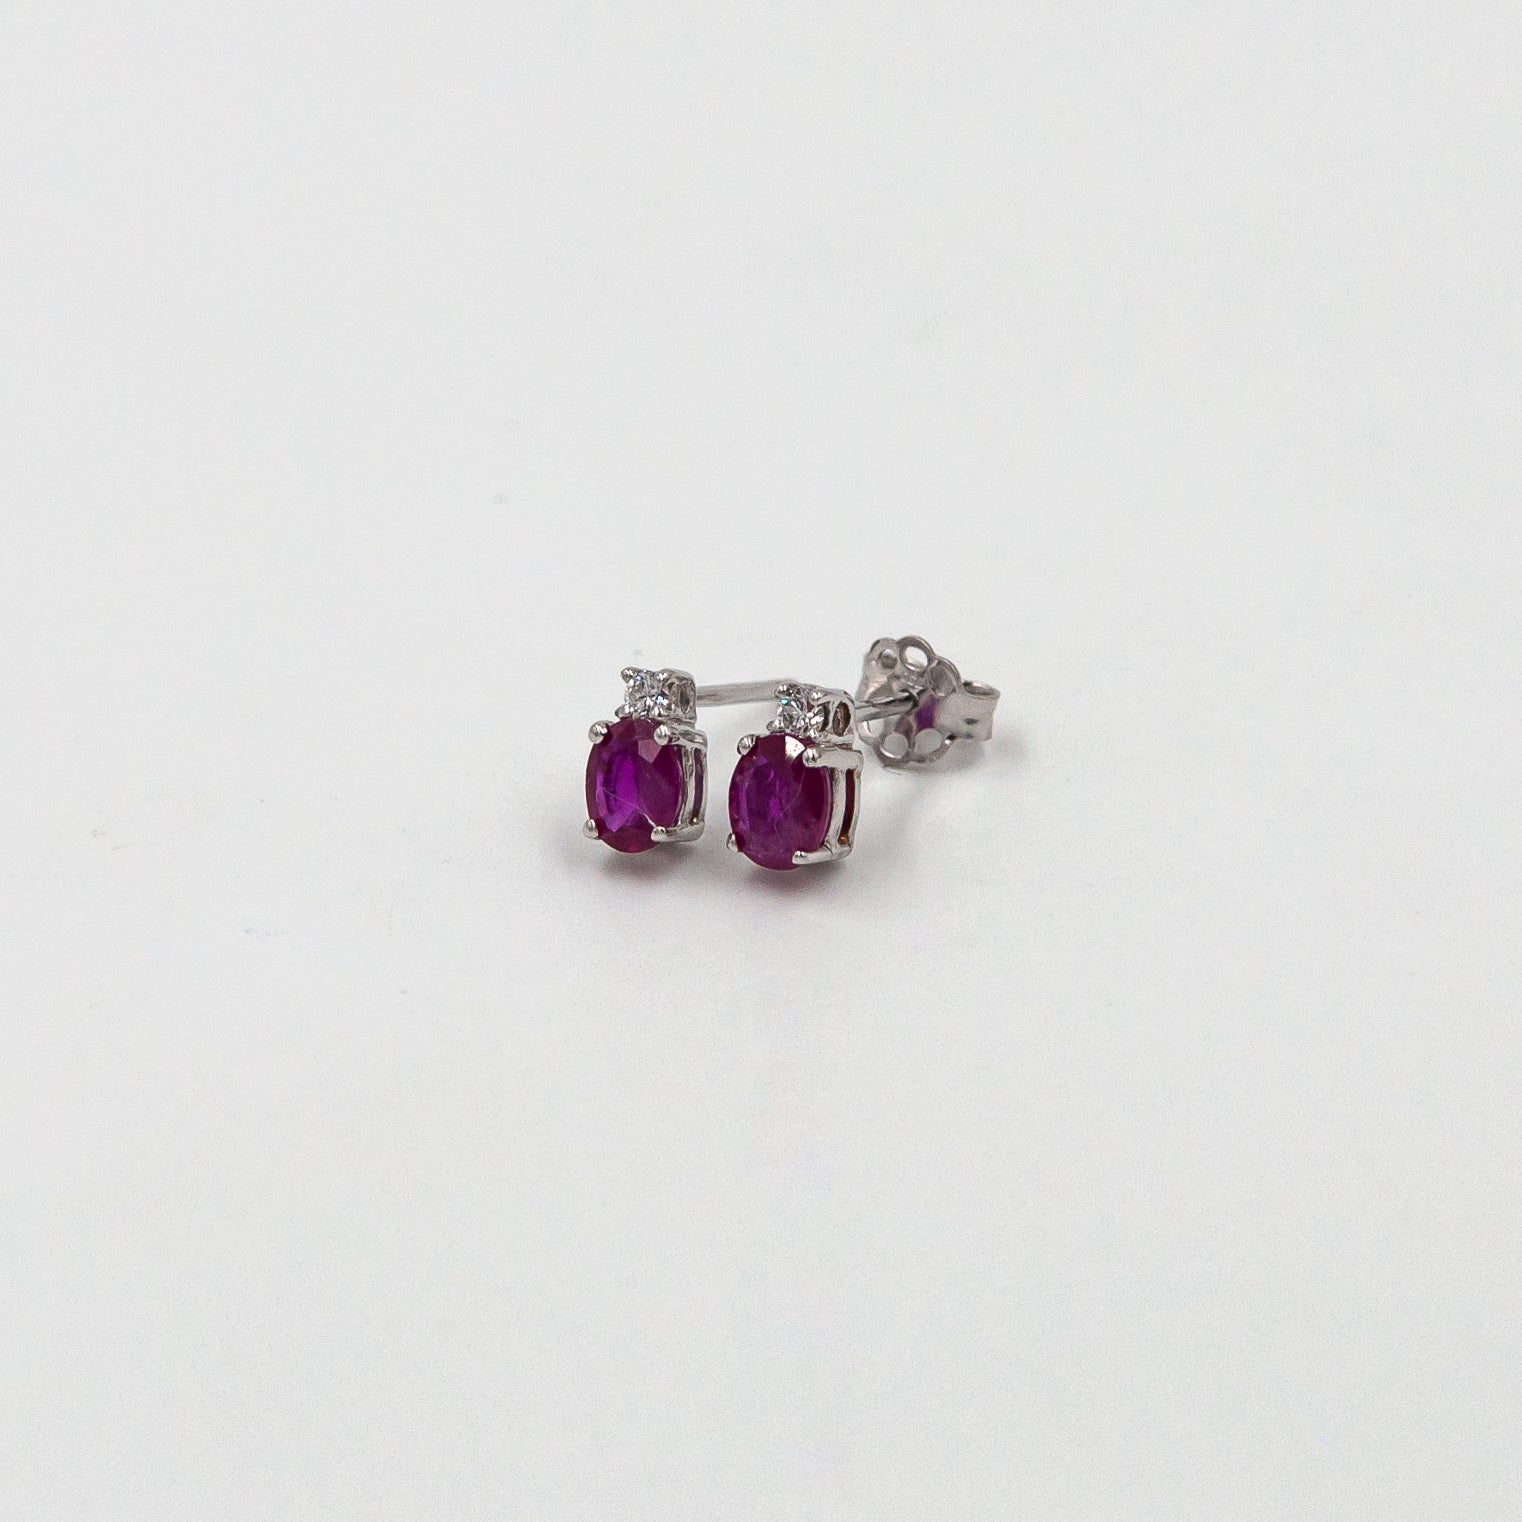 Droplets earrings with rubies and diamonds